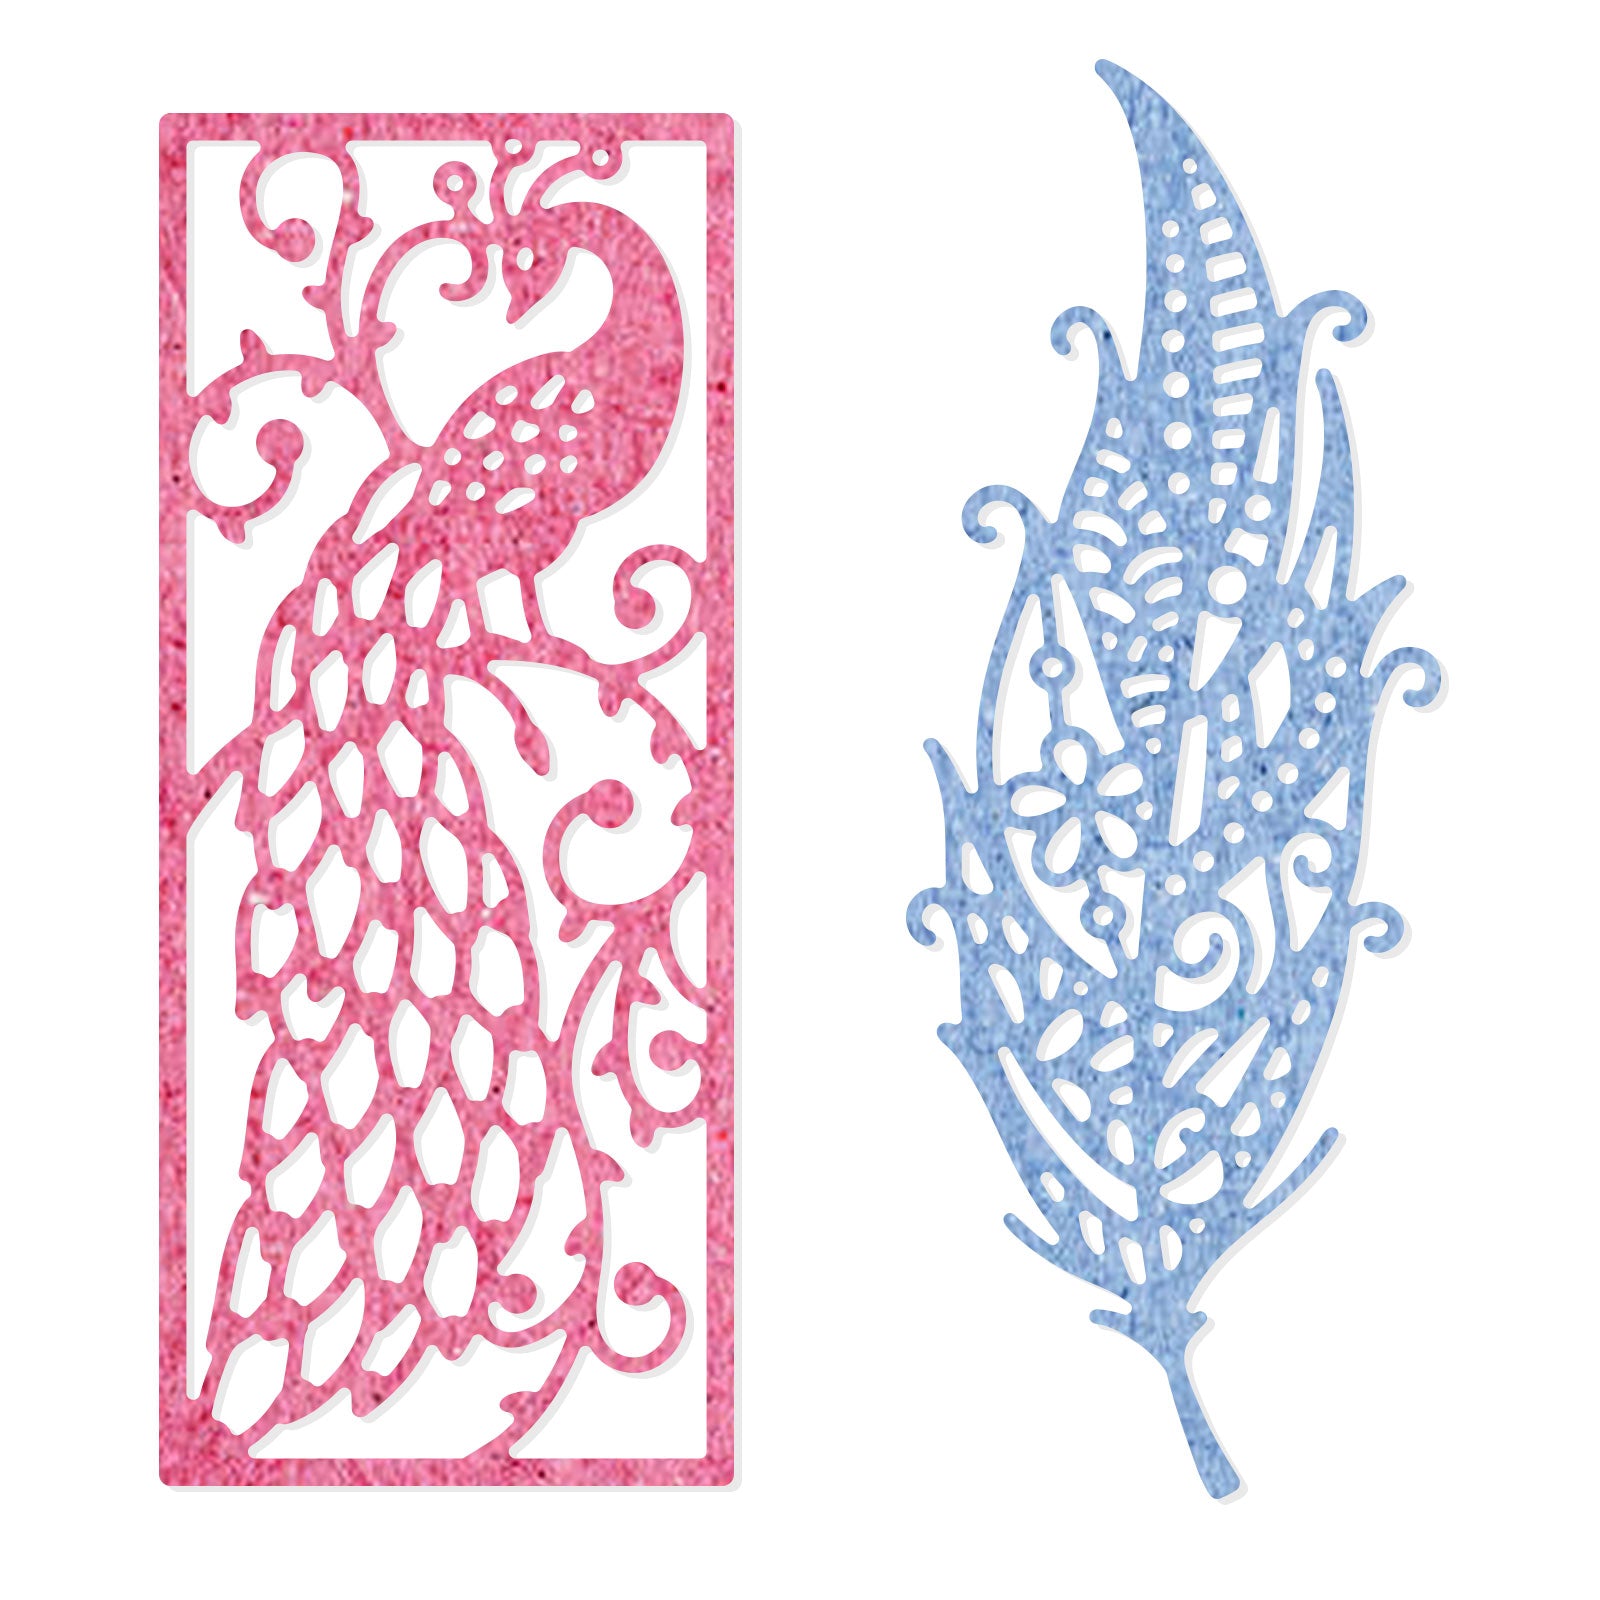 Globleland Peacock, Feather Carbon Steel Cutting Dies Stencils, for DIY Scrapbooking/Photo Album, Decorative Embossing DIY Paper Card